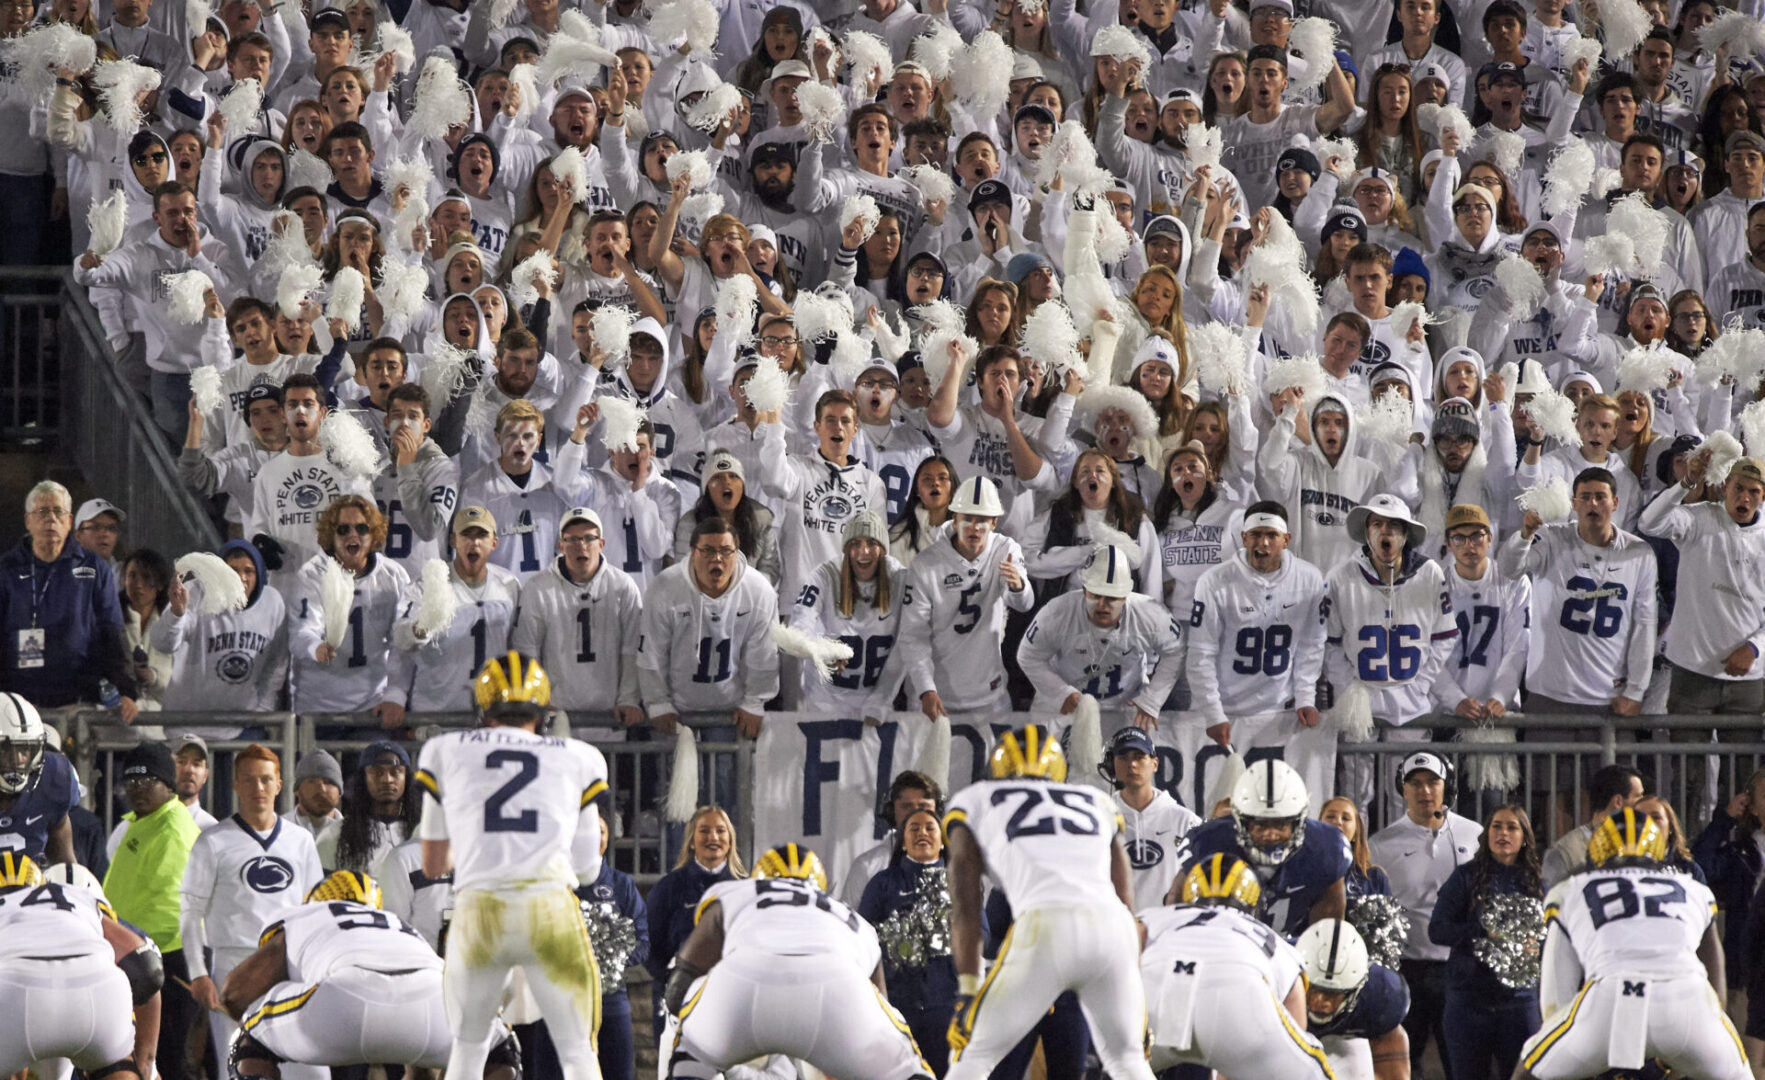 Penn State says fall sports will be played without fans